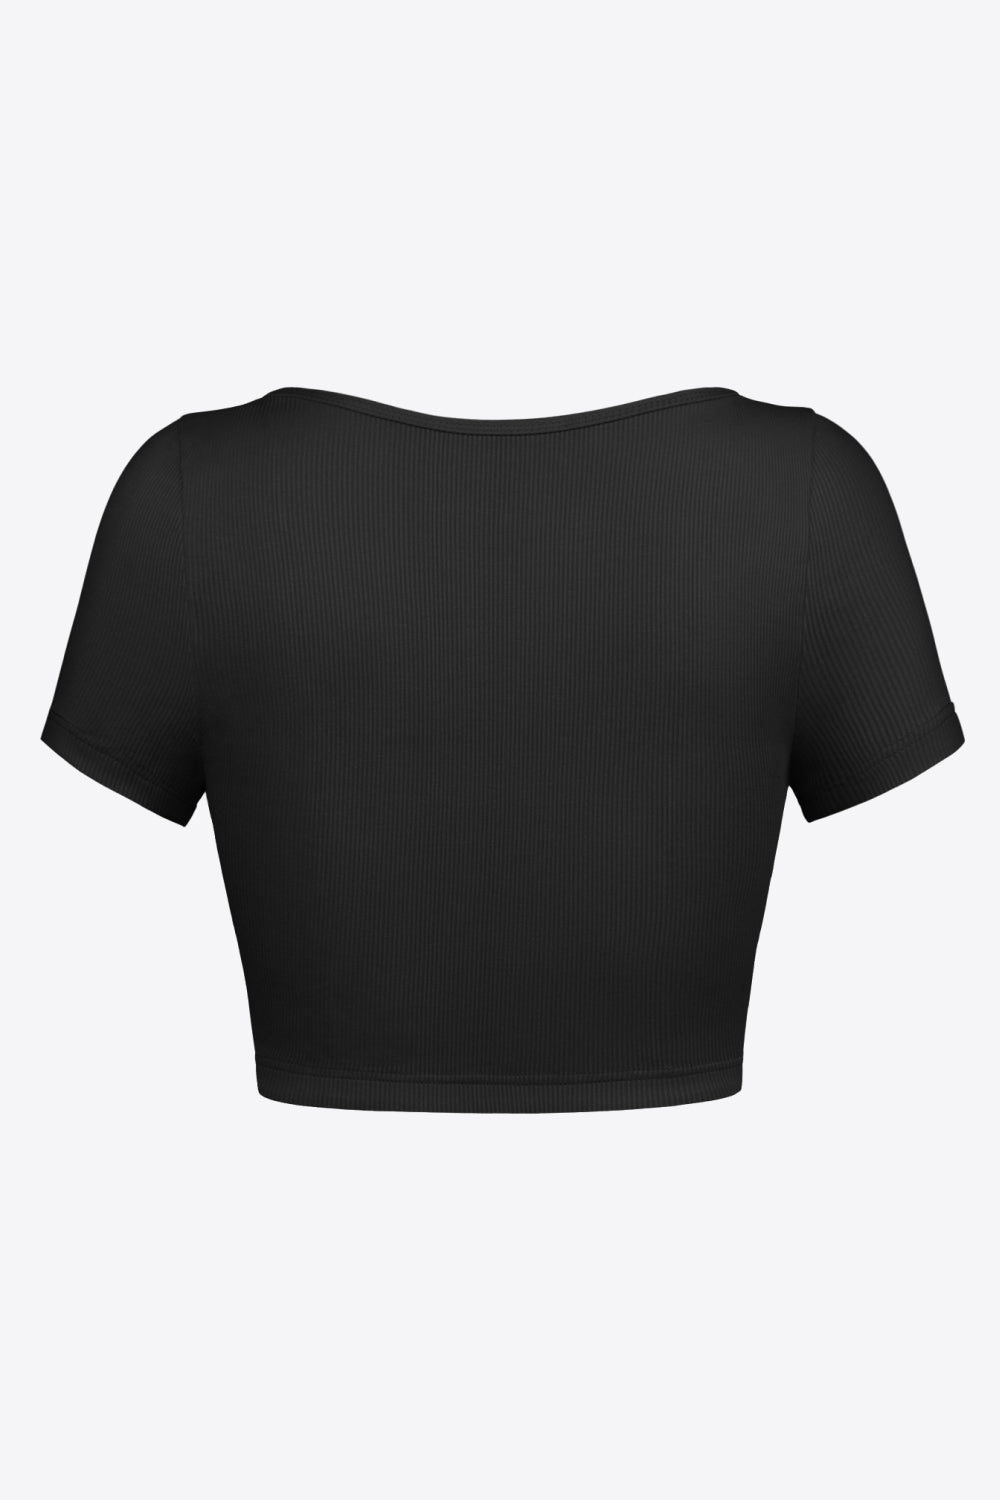 Square Neck Ribbed Crop Top - Guy Christopher 